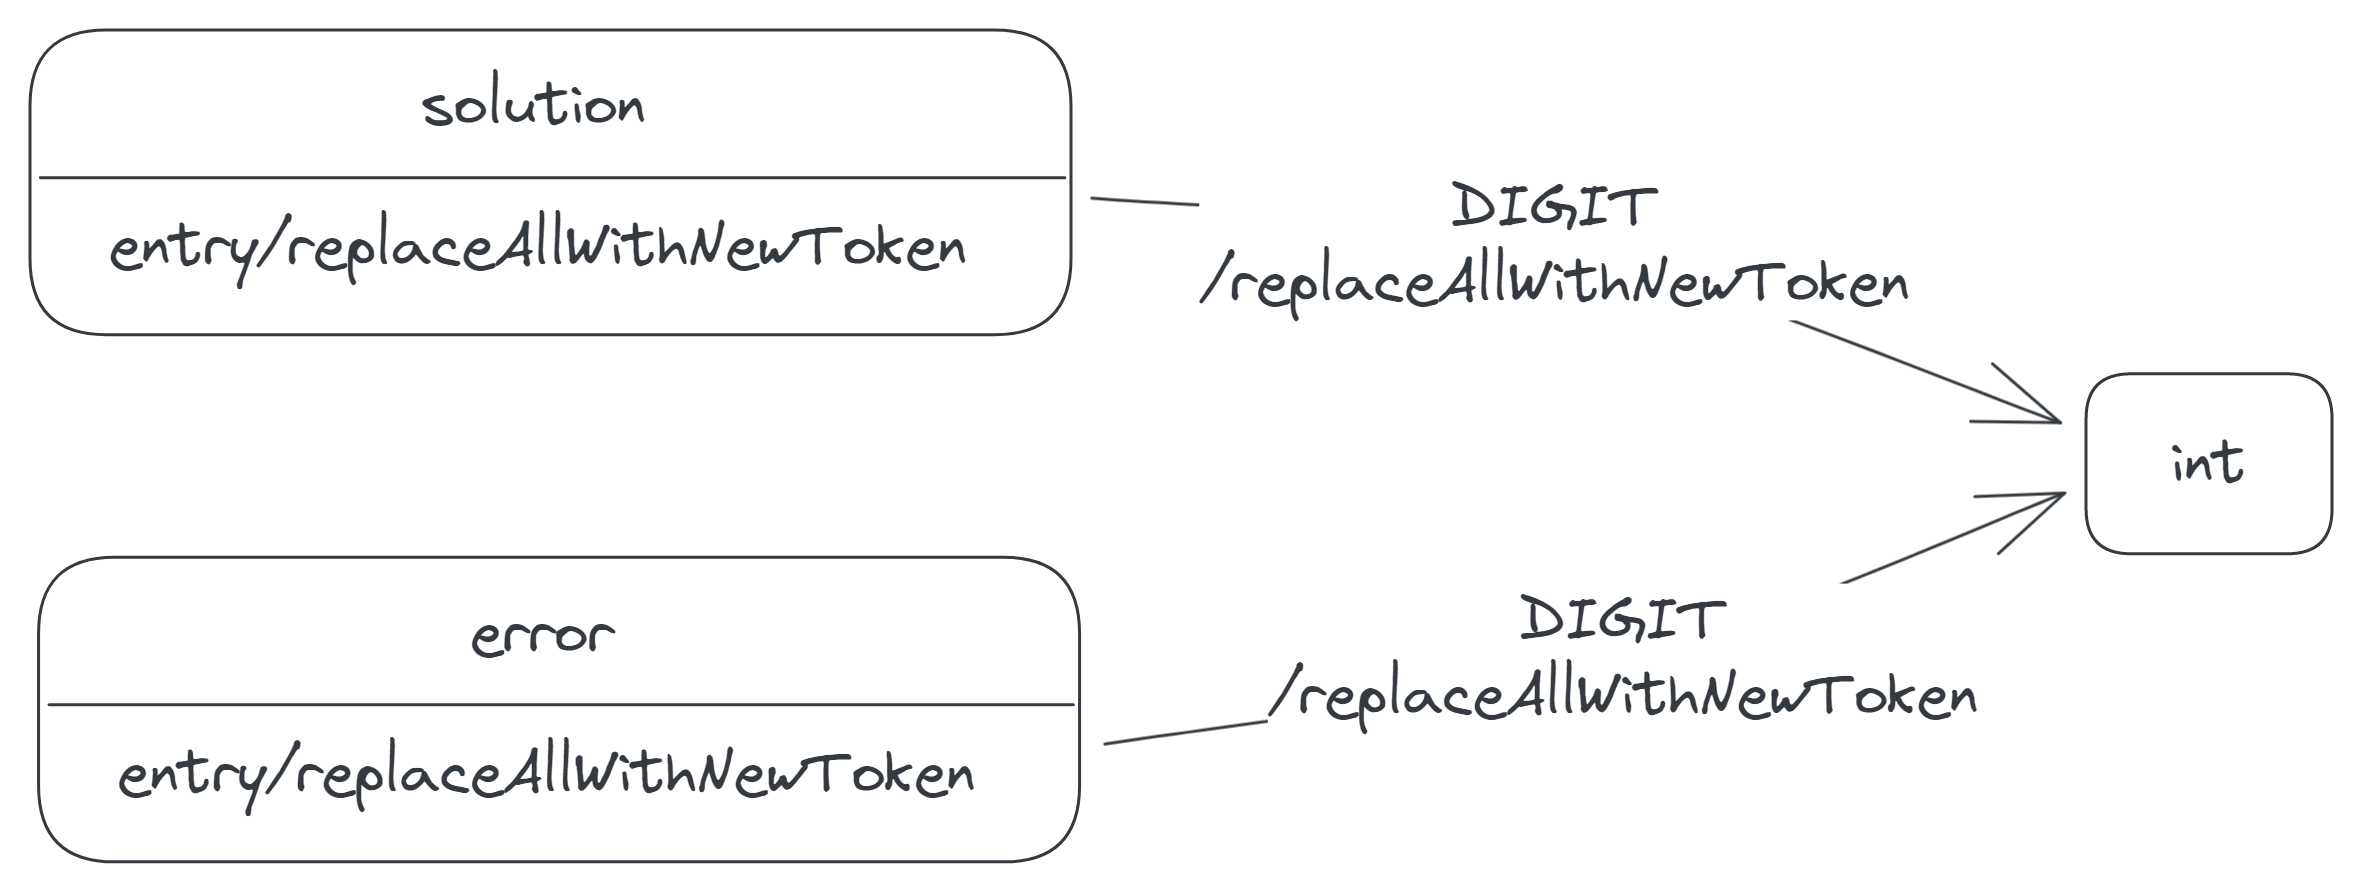 Two transitions labelled 'DIGIT/replaceAllWithNewToken', from the solution and error states to the int state.